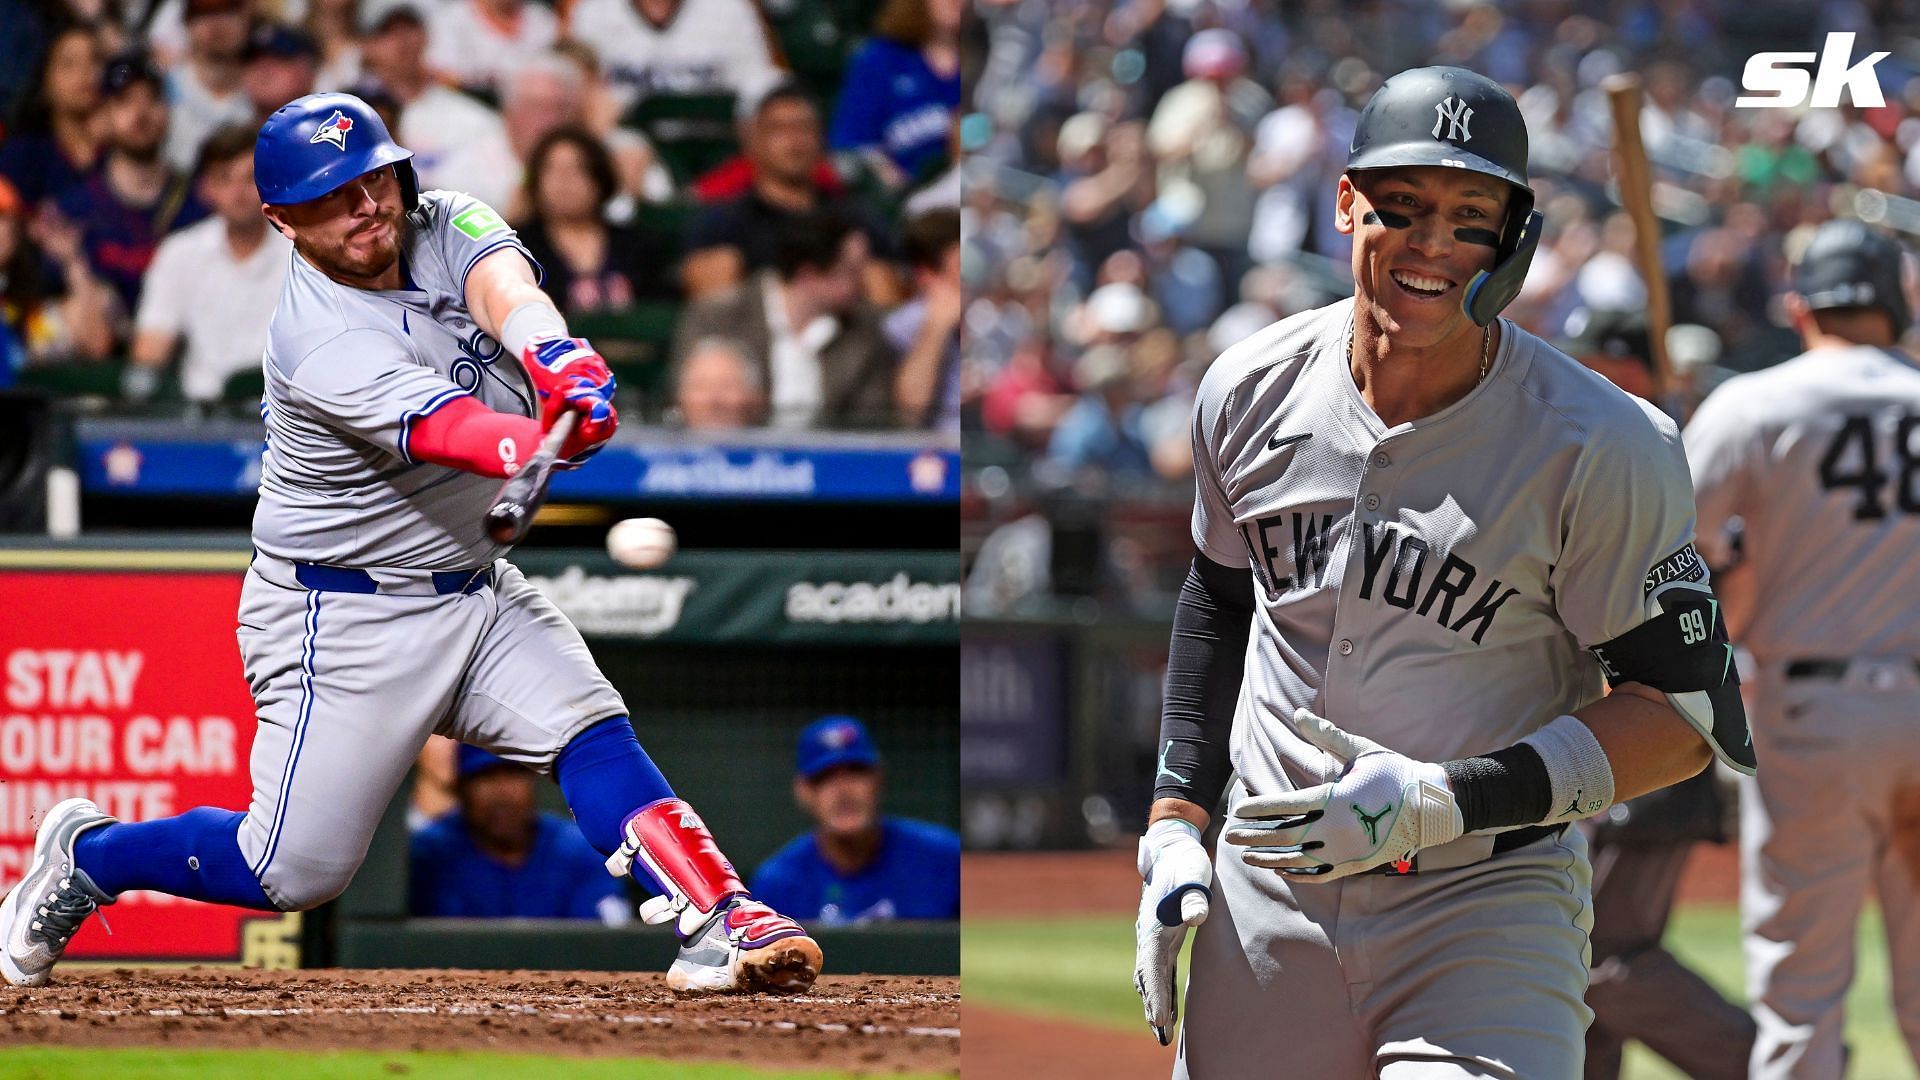 The New York Yankees and Toronto Blue Jays will play their first series of the season against each other this weekend